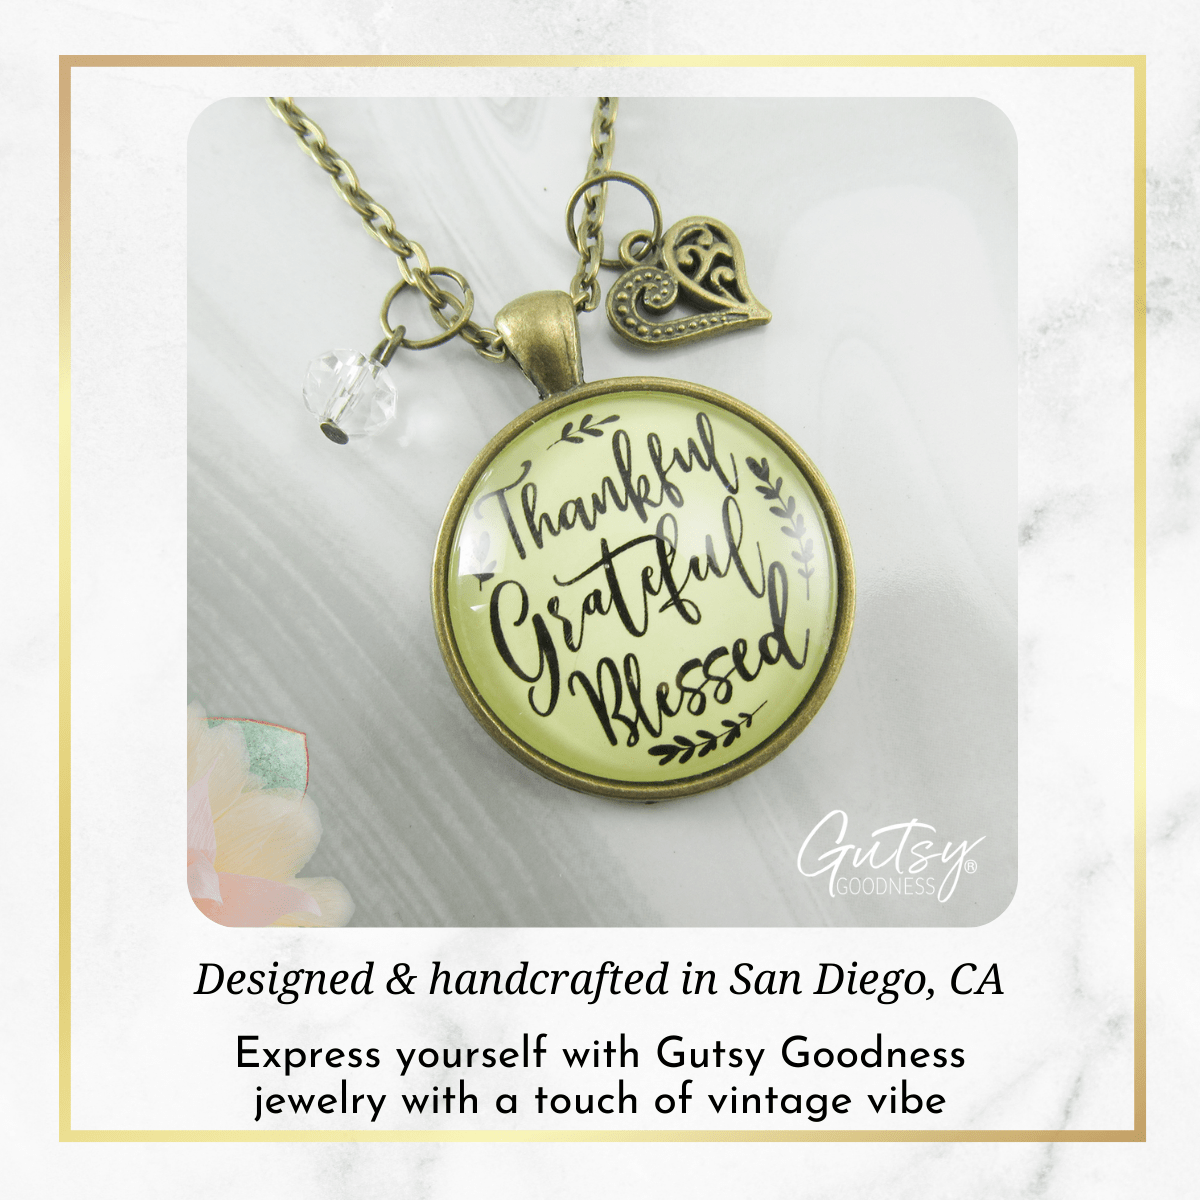 Gutsy Goodness Thankful Grateful Blessed Necklace Blessing Words Womens Jewelry - Gutsy Goodness Handmade Jewelry;Thankful Grateful Blessed Necklace Blessing Words Womens Jewelry - Gutsy Goodness Handmade Jewelry Gifts